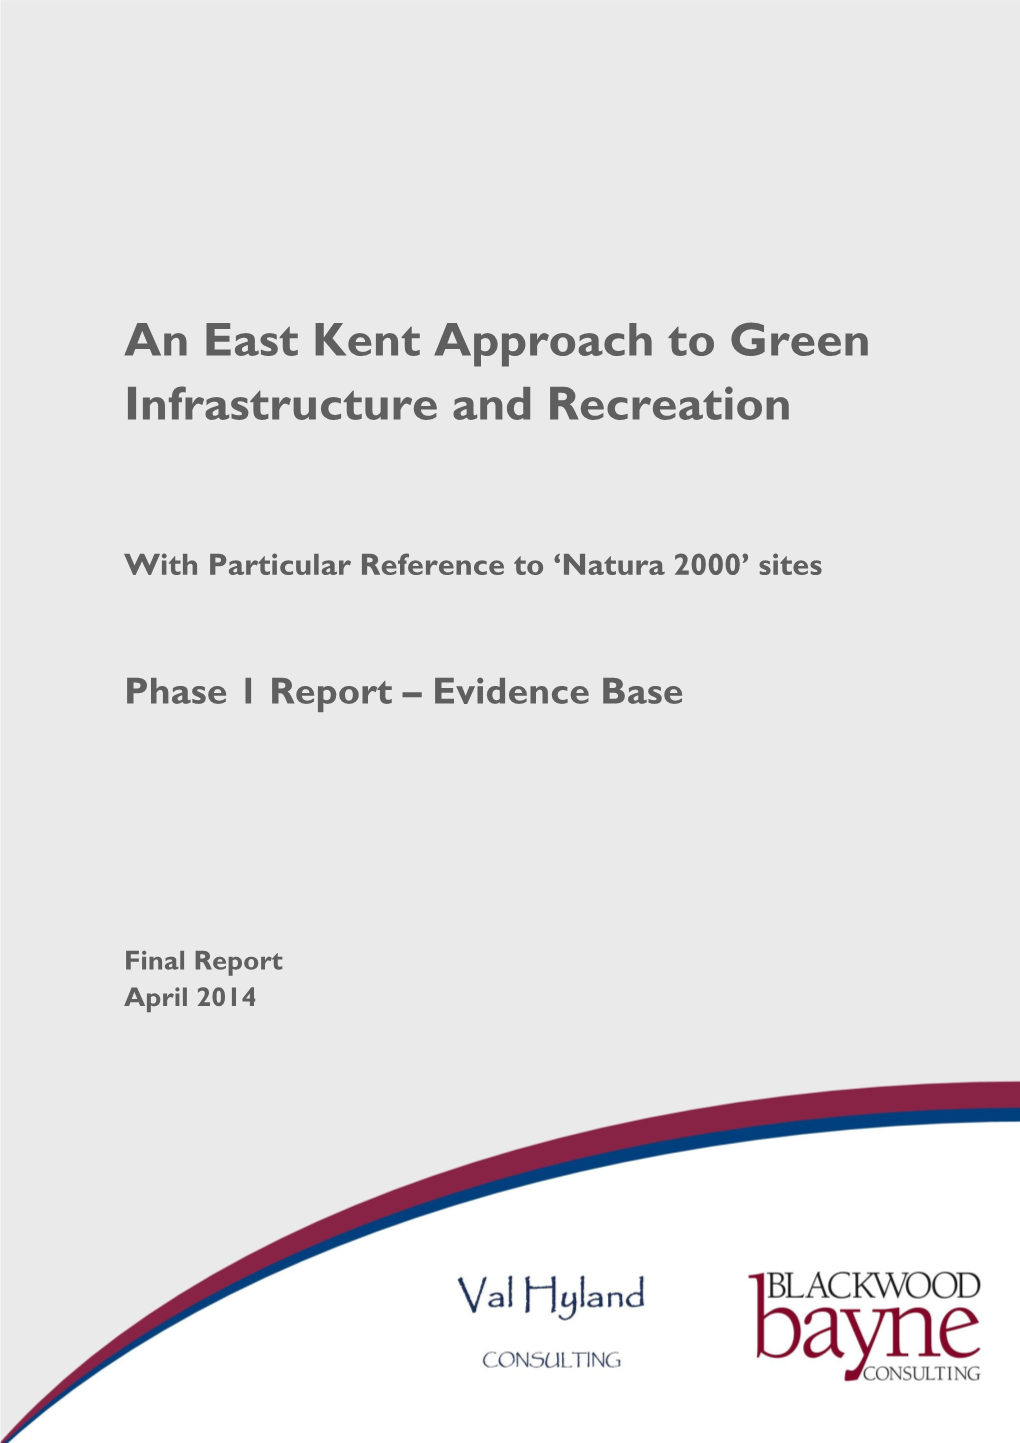 An East Kent Approach to Green Infrastructure and Recreation Report